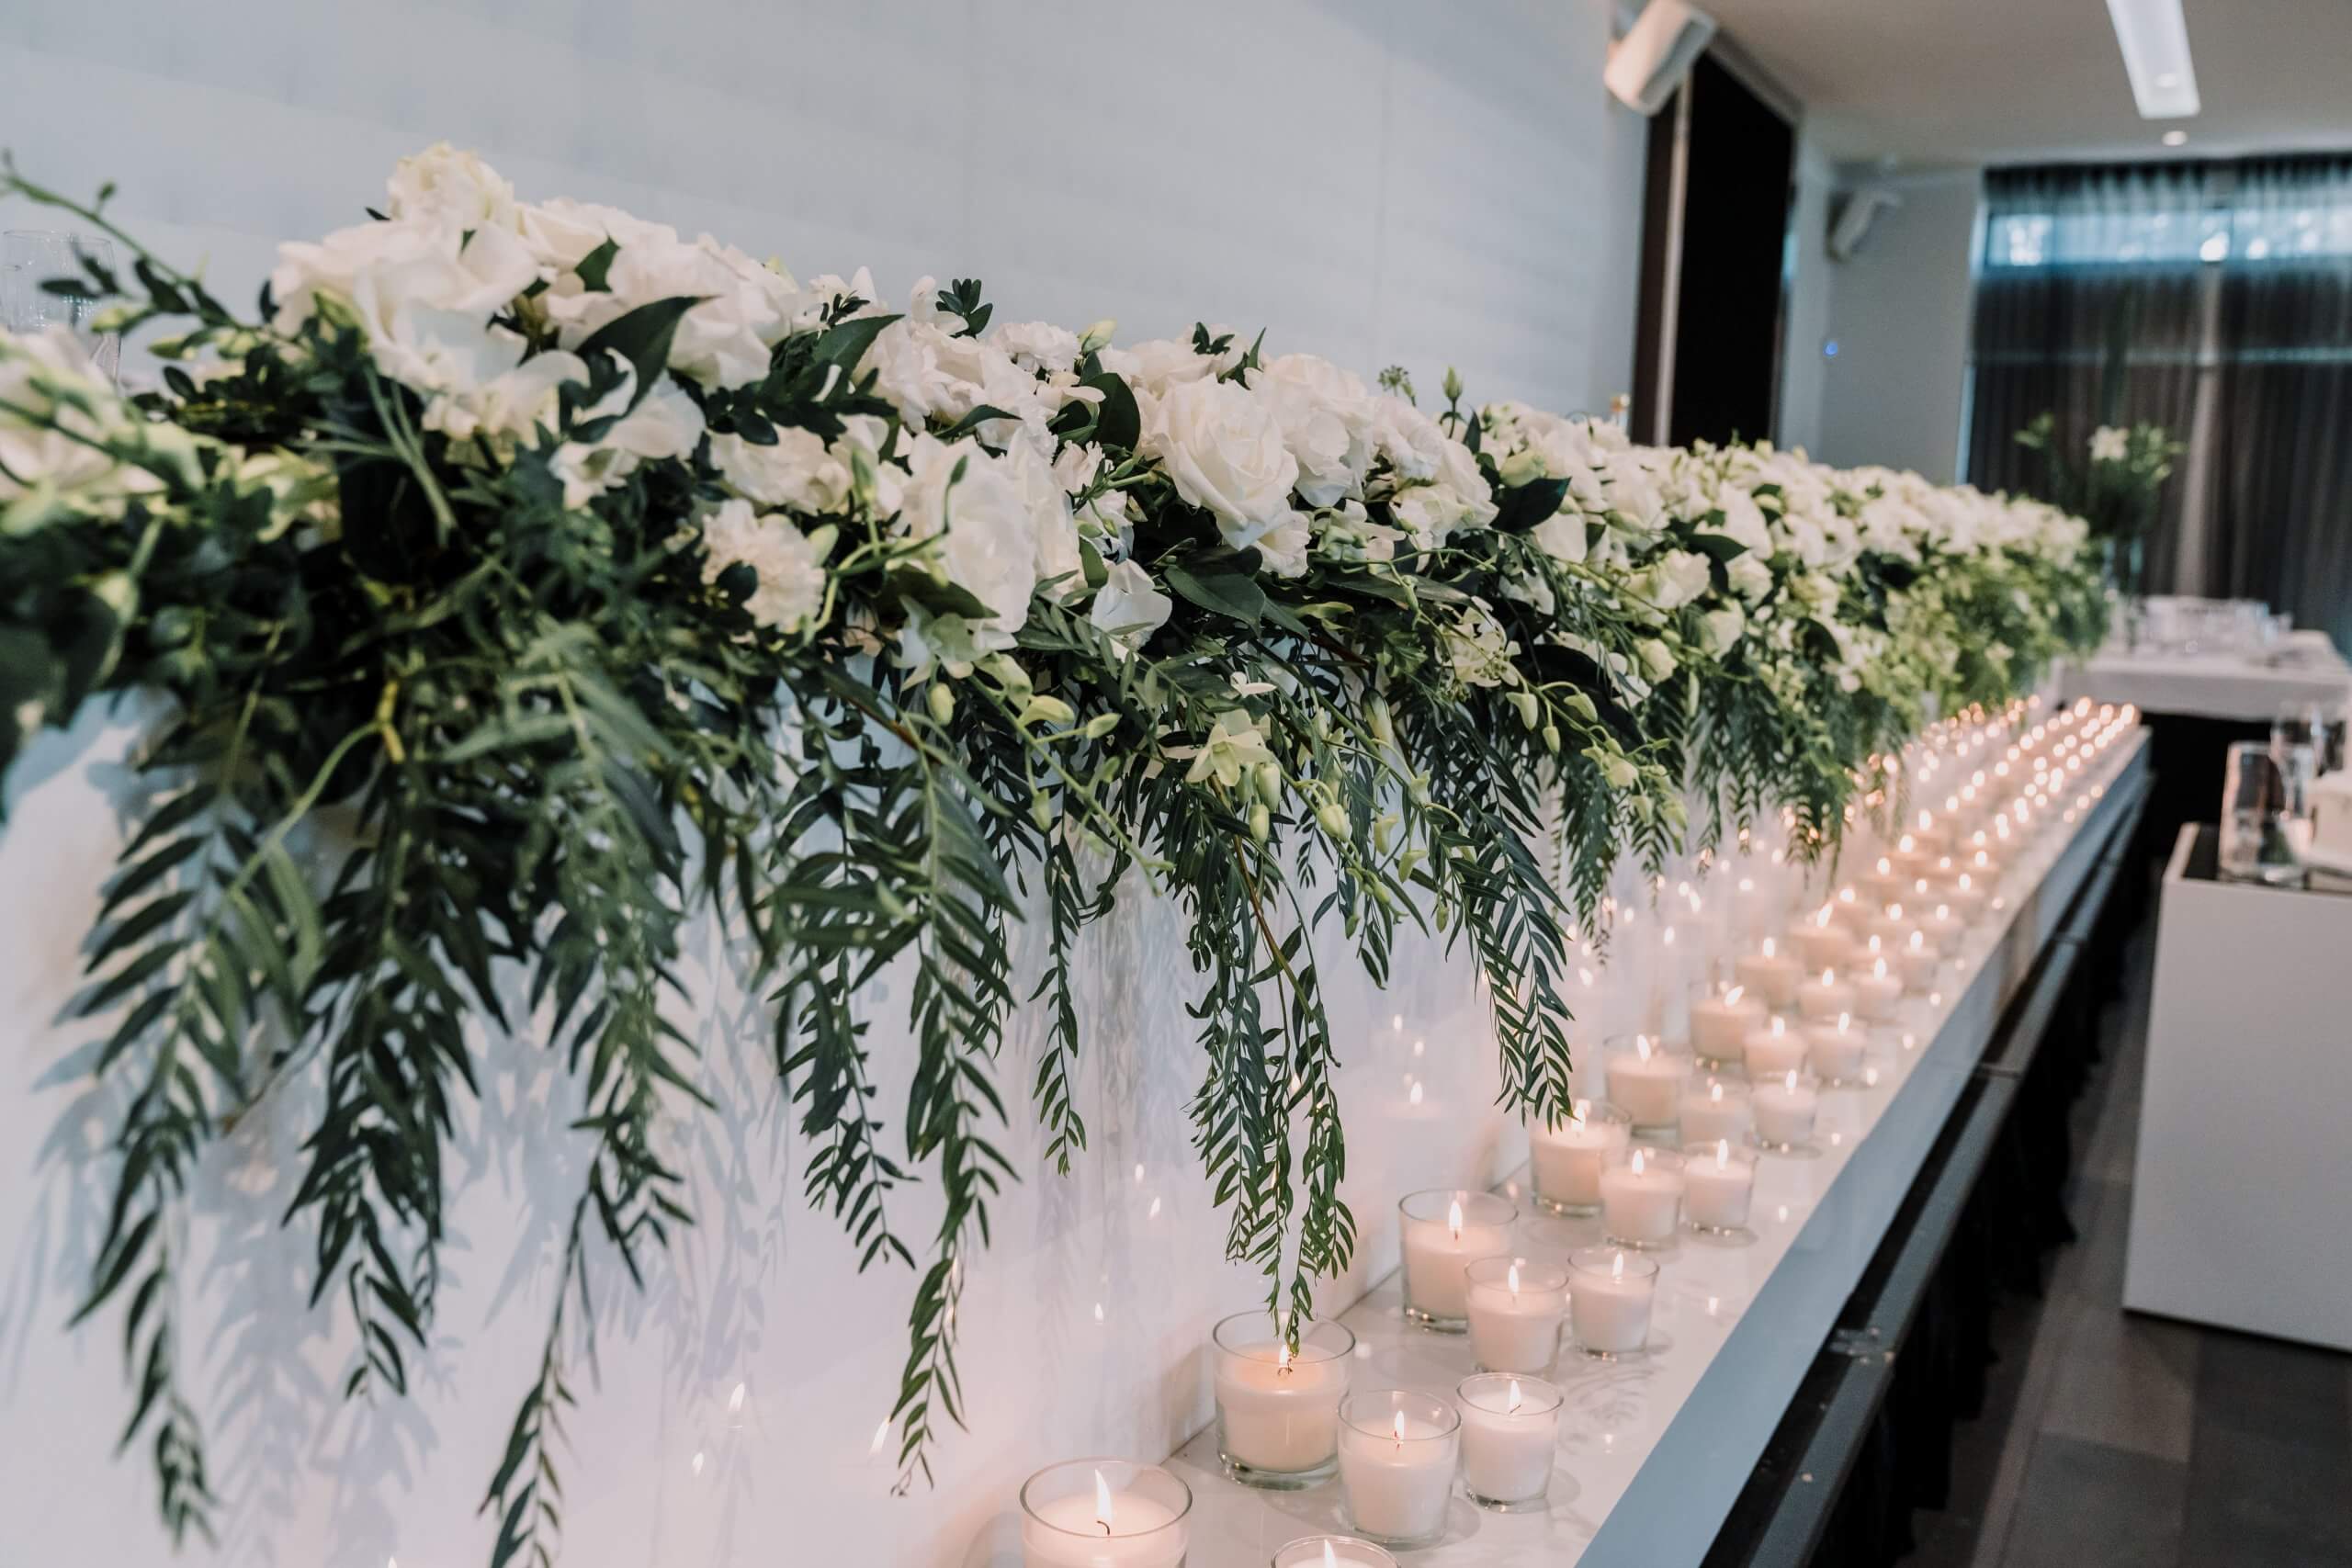 Beautiful floral arrangements and white candles lining the reception.